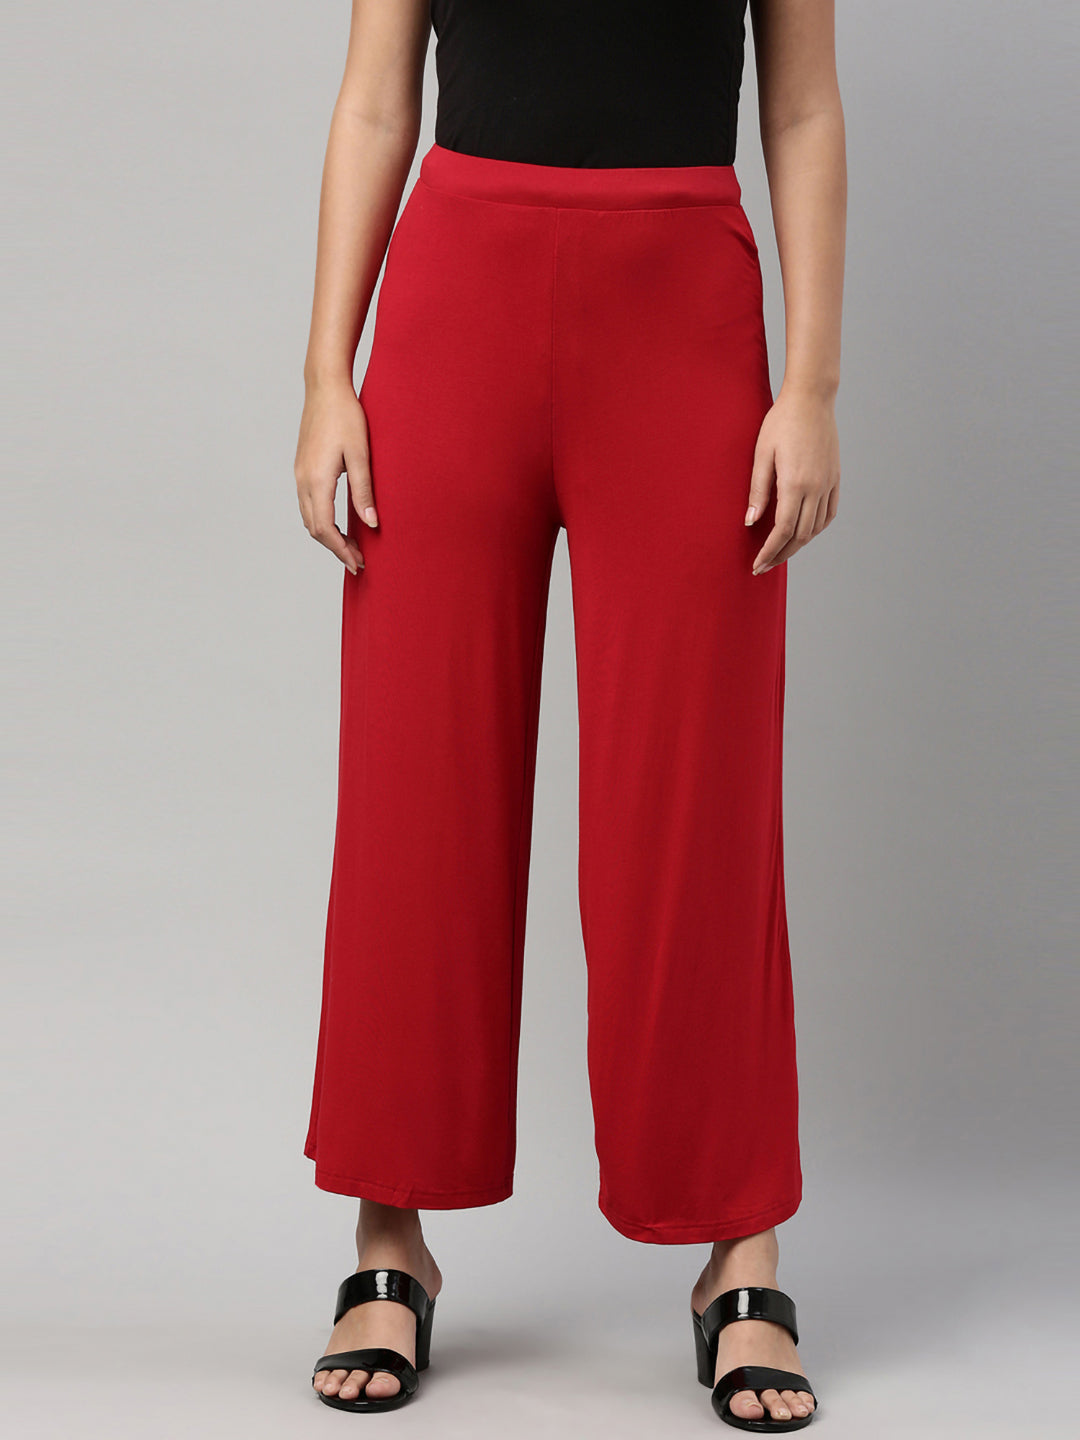 Share 91+ go colours trousers super hot - in.cdgdbentre